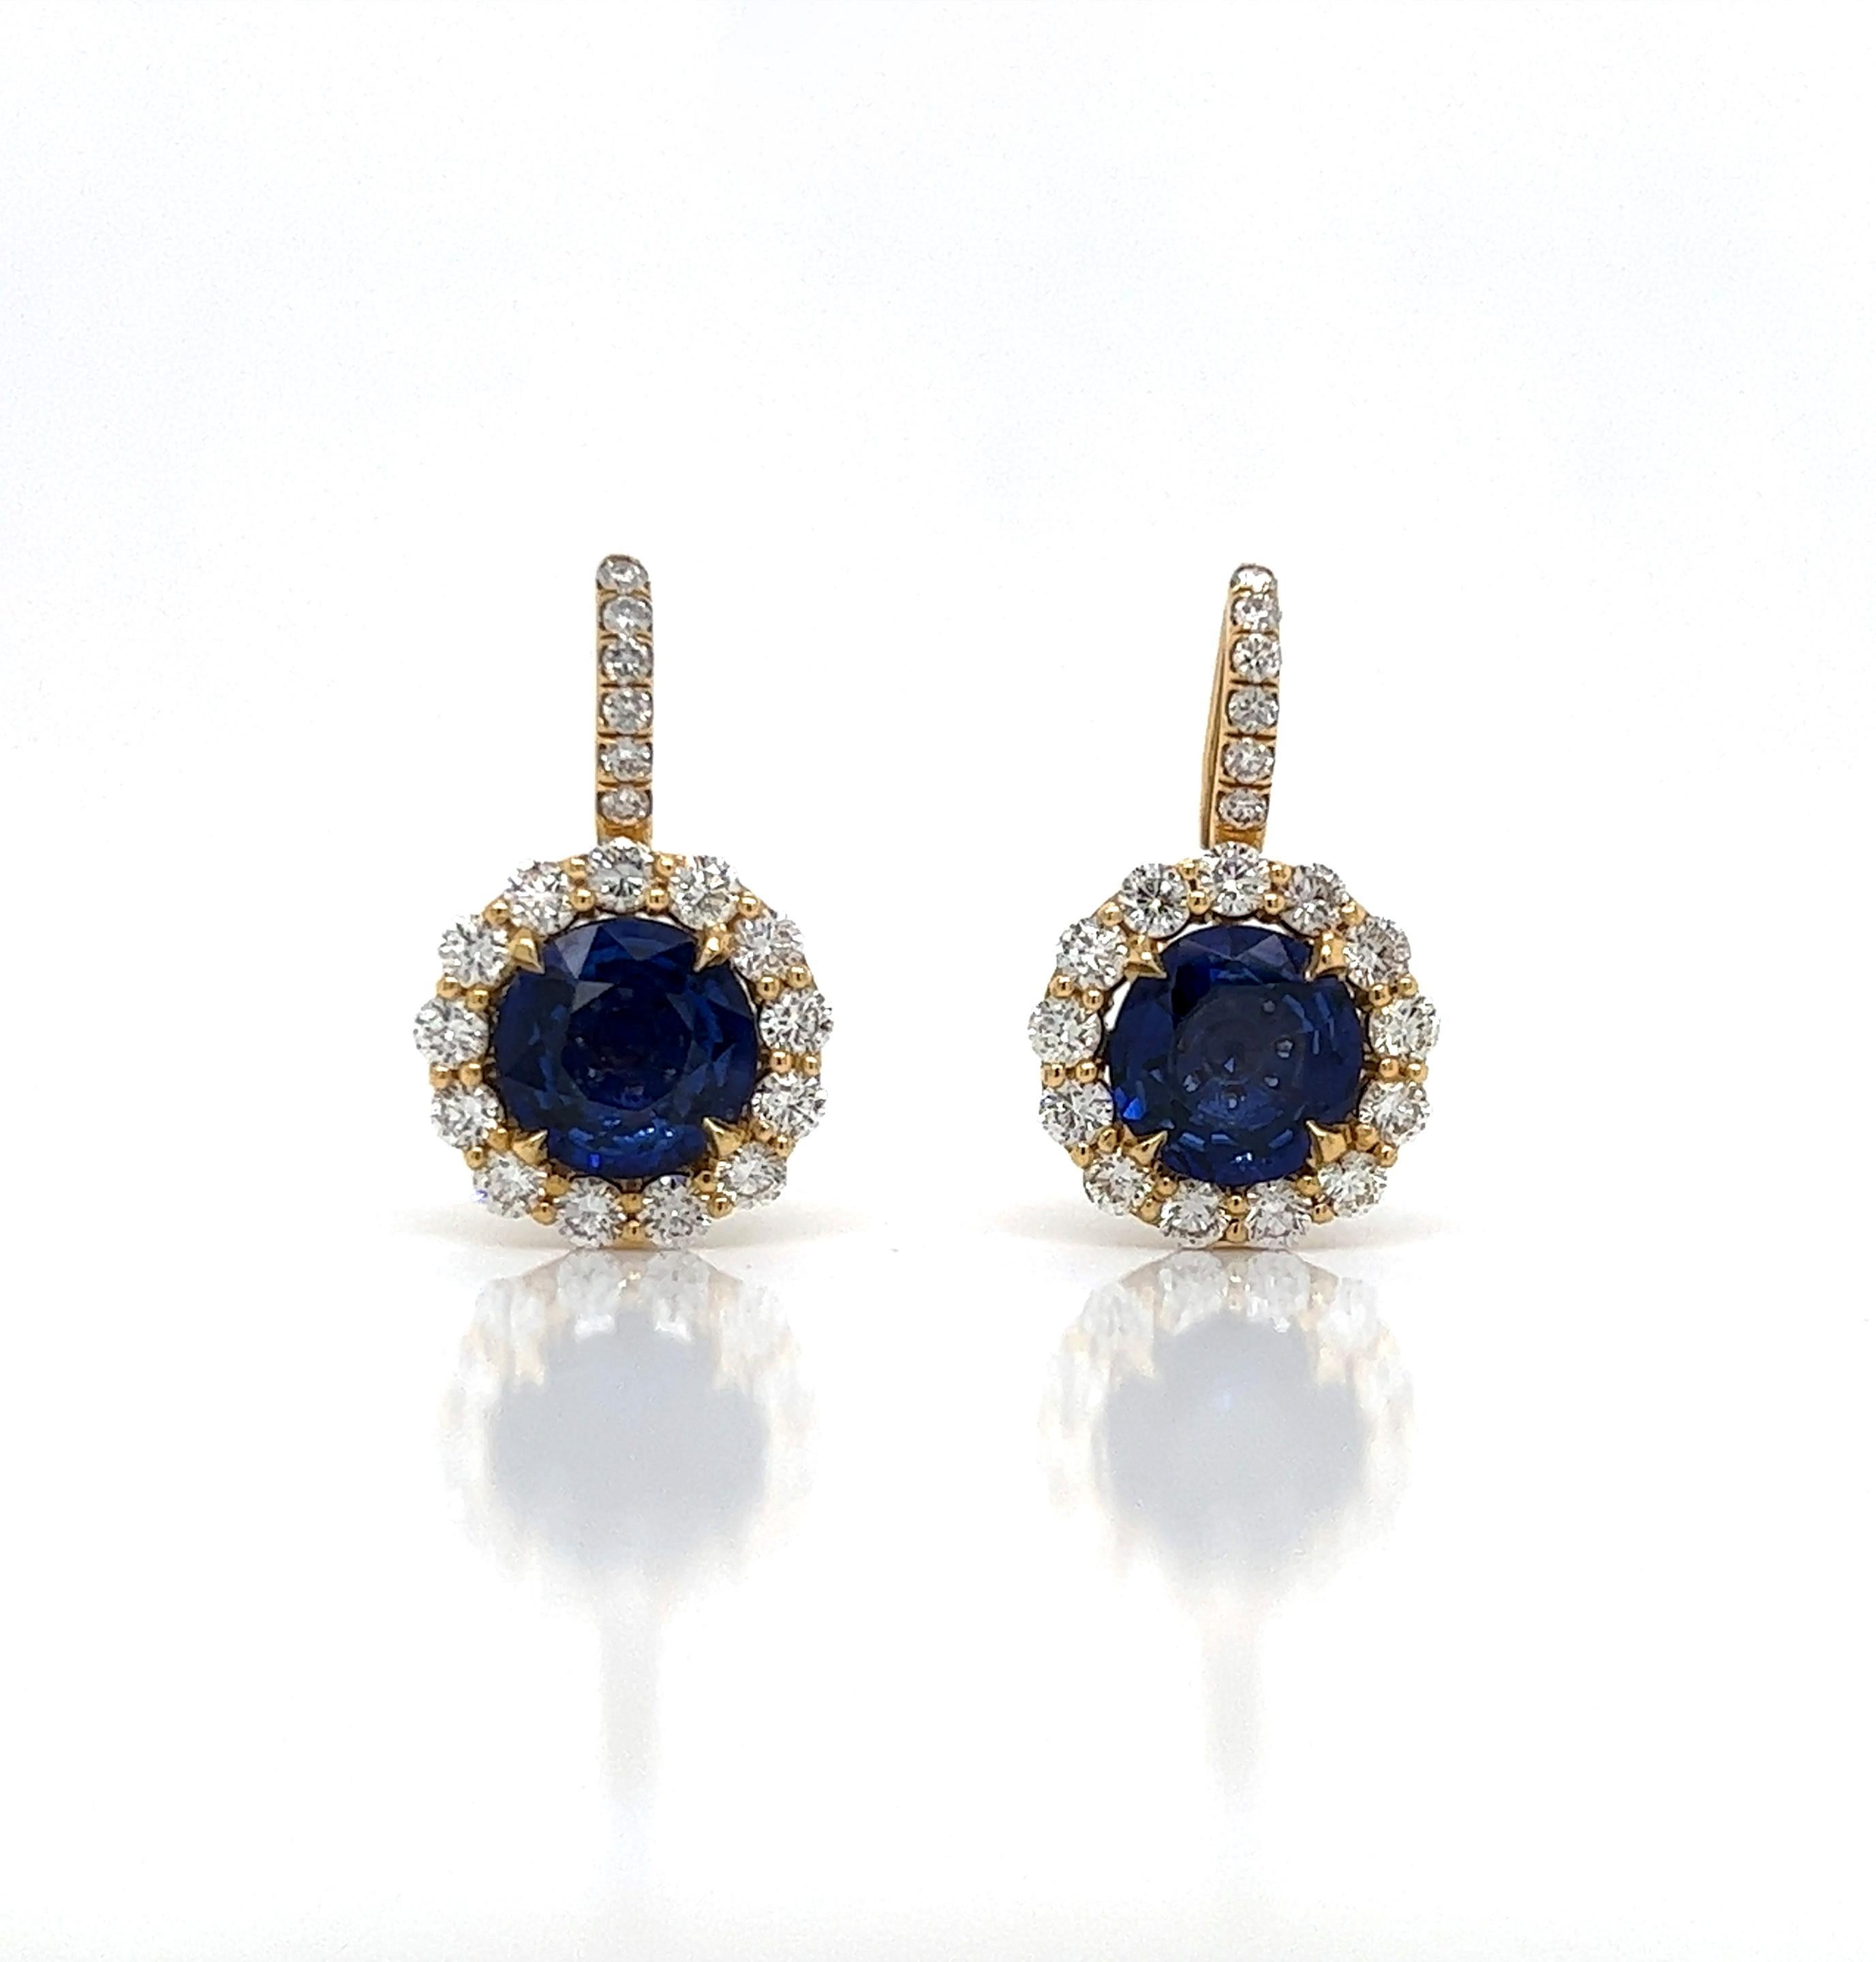 6.23 Total Carat Blue Sapphire and Diamond Halo Pave Earrings in 18K Gold

These glamorous sapphire earrings are perfectly handcrafted from the finest diamonds, sapphire, and quality gold. The aesthetics of blue sapphires surrounded by halo and pave